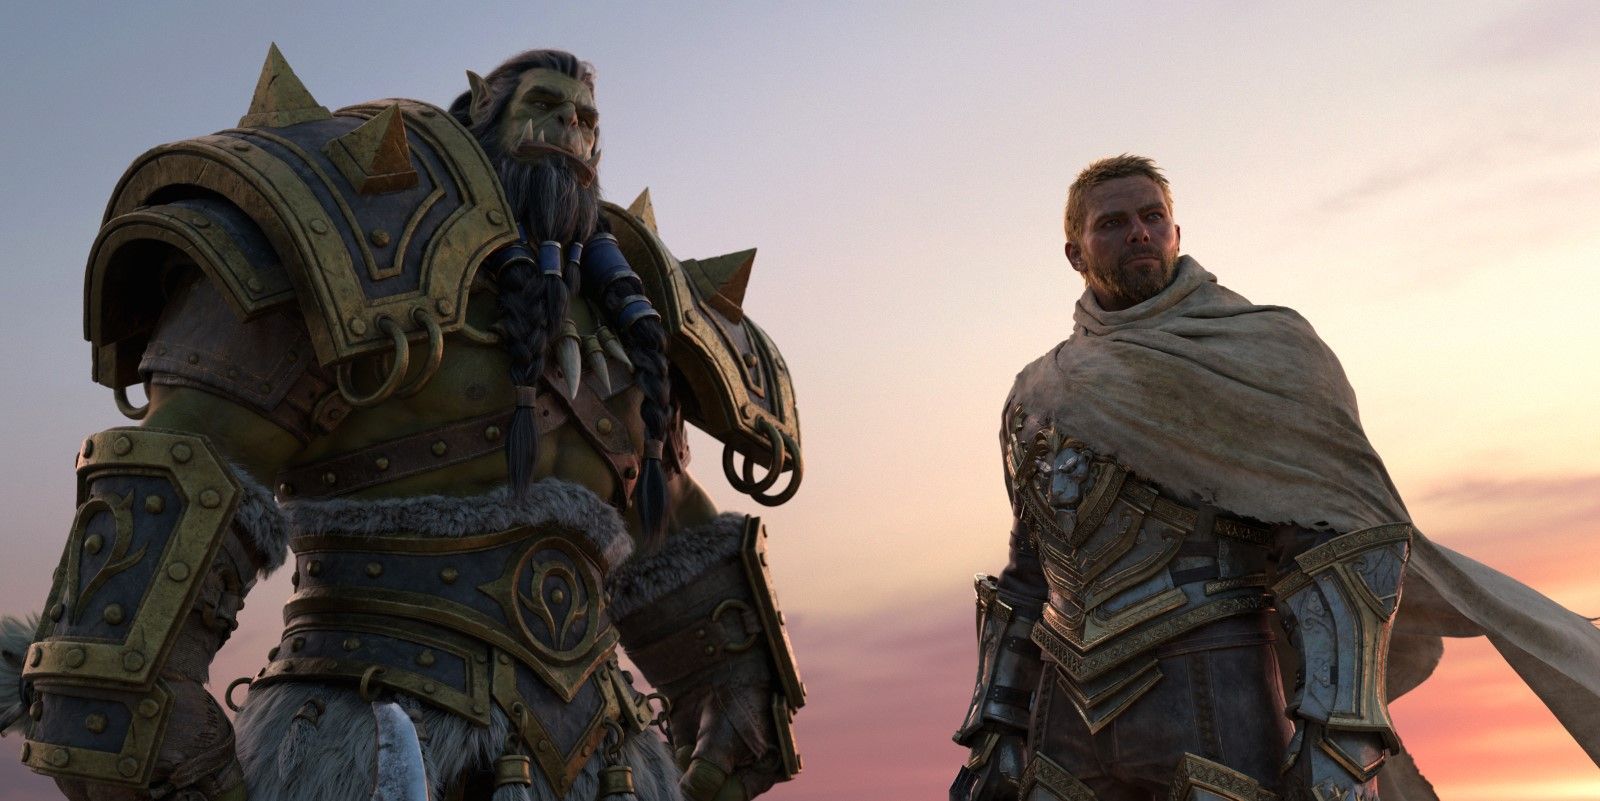 World of Warcraft Thrall and Anduin